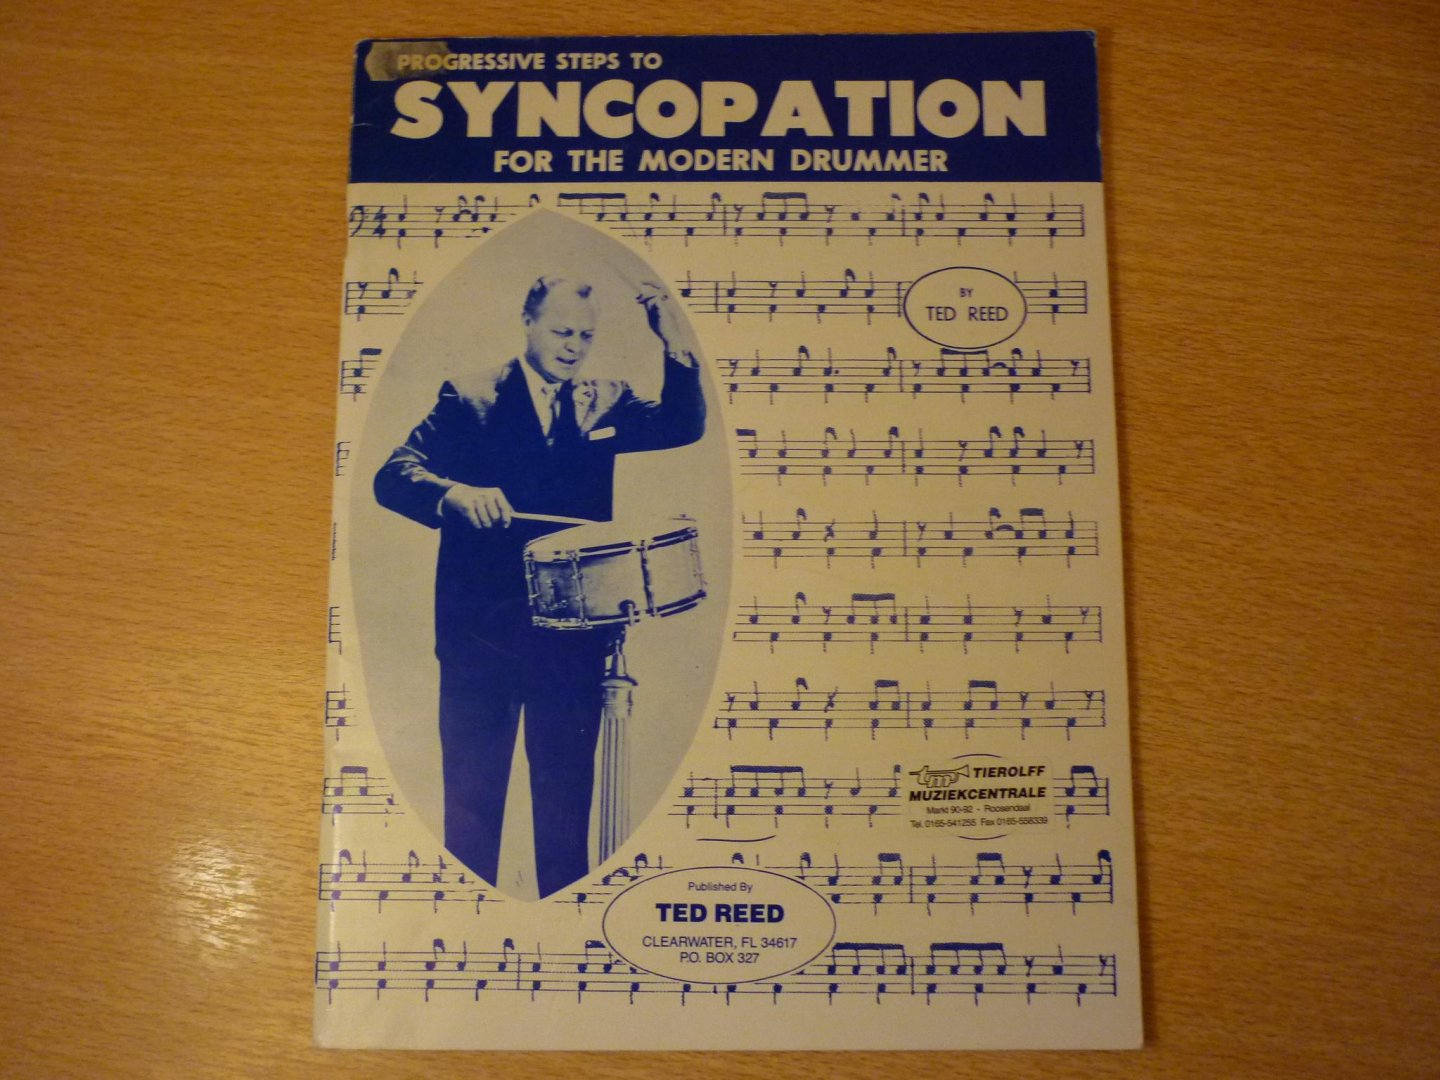 Reed; Ted - SYNCOPATION; Progressive steps to; for the modern drummer